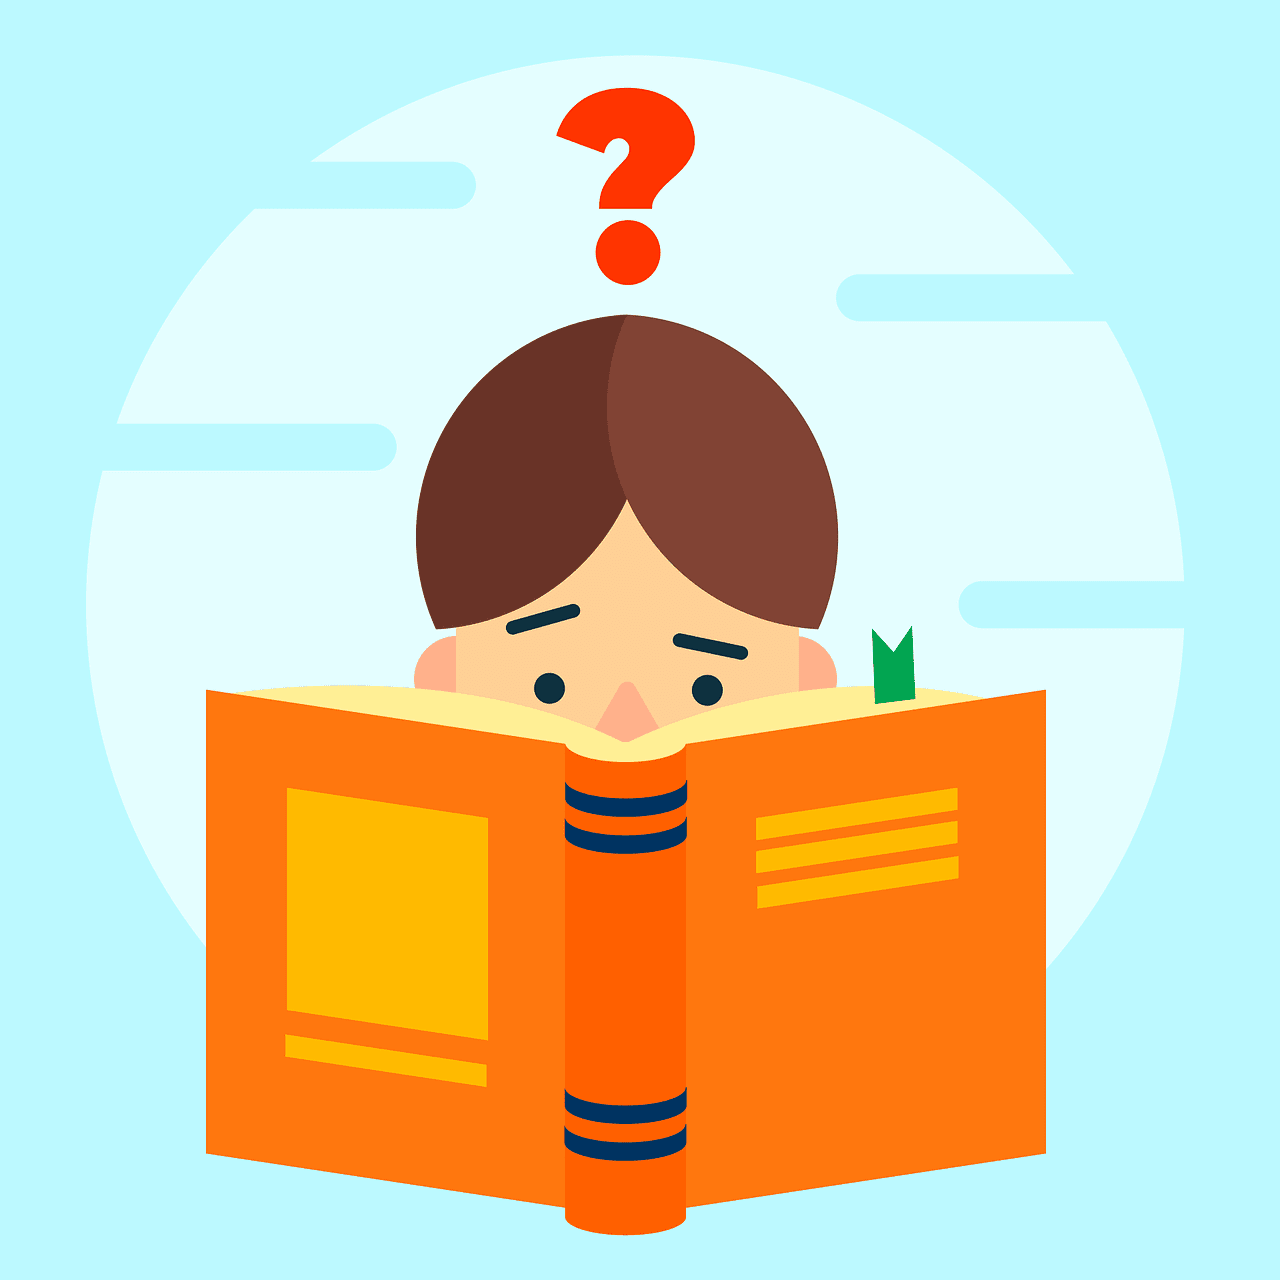 A stylized image of a person studying on a book with a question mark over their head.